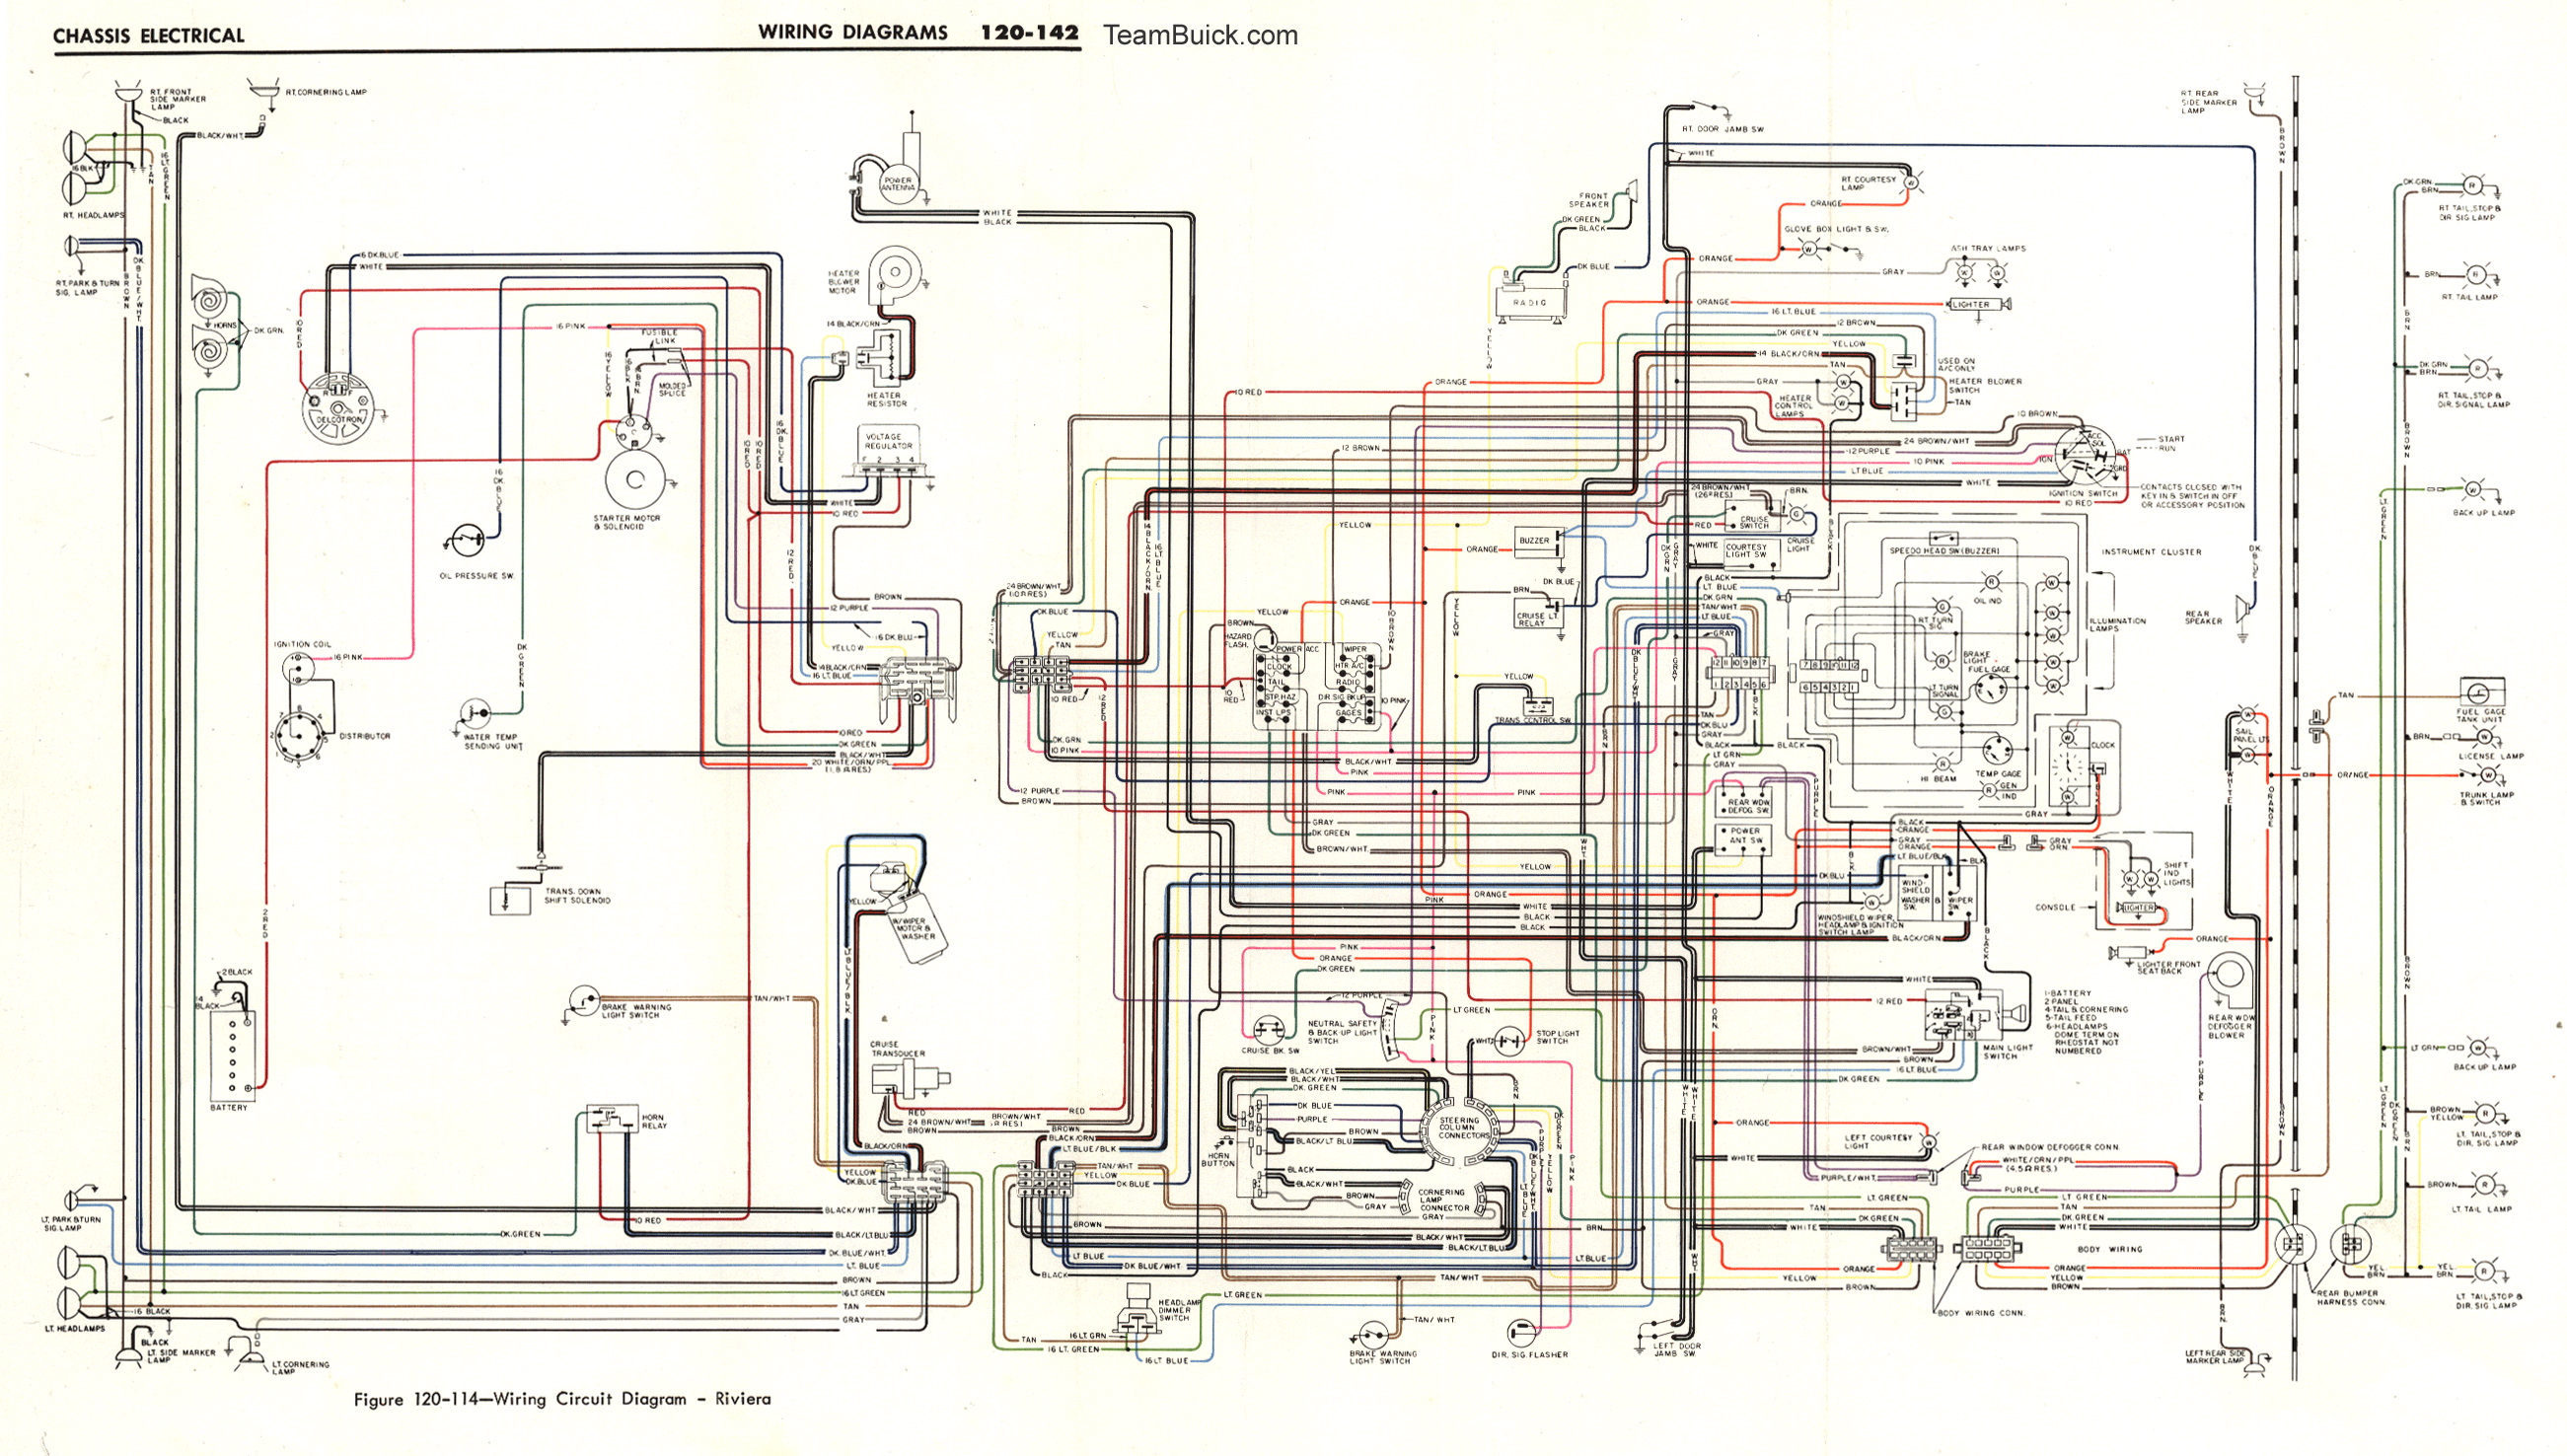 Wiring Circuit Diagrams, 1968 Buick Chassis Manual